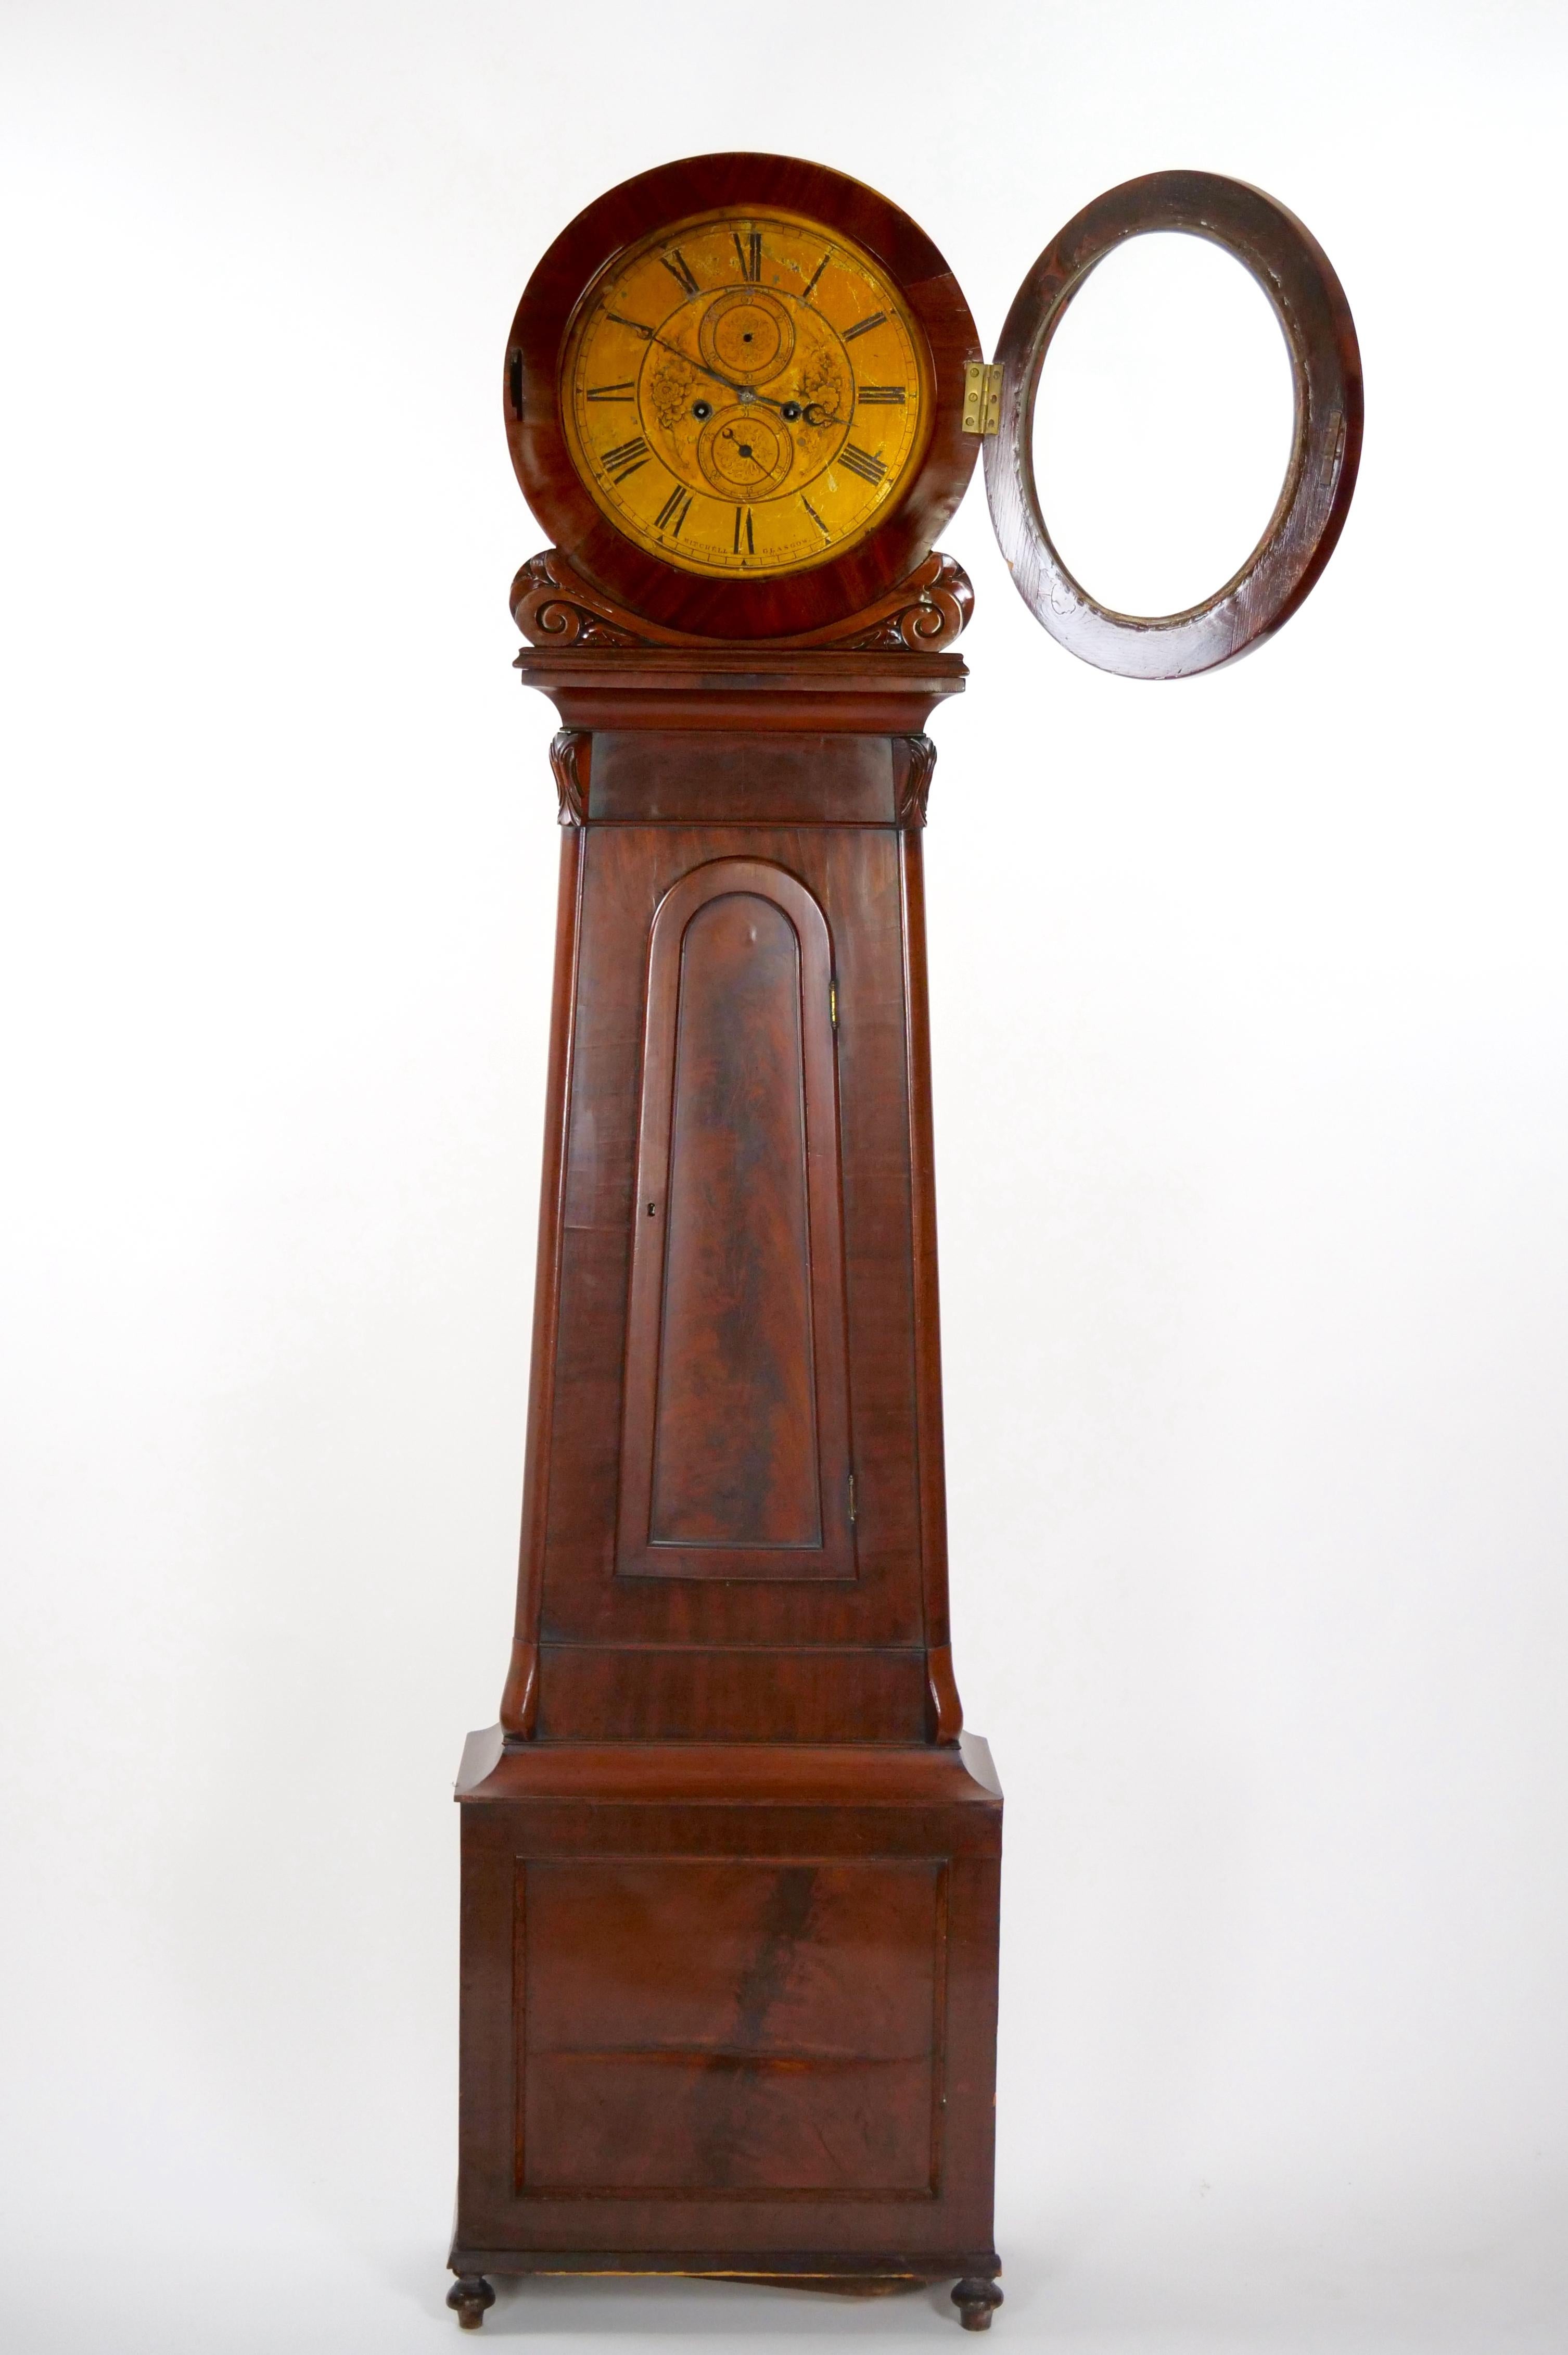 Transport yourself back in time with this exquisite Early 19th Century Mahogany Wood Scottish Drumhead Tall Case Clock. Encased in a rich mahogany frame adorned with banded veneer panels, this clock exudes timeless elegance and historical charm.